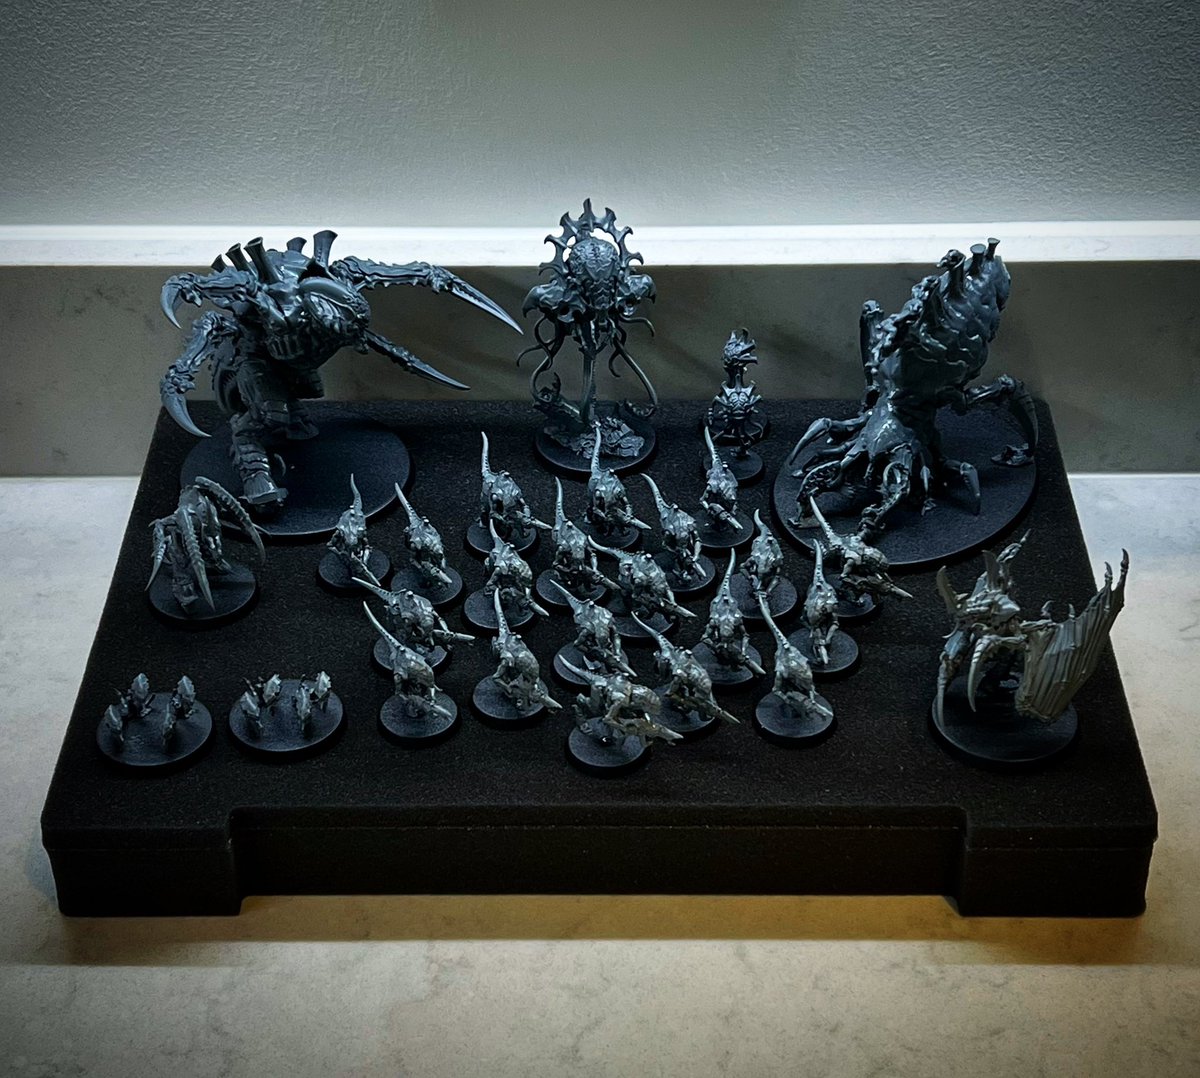 Took some time but I’ve finally built the Tyranids from the leviathan box.

#warhammer40k #tyranids40k #termagant #ripperswarm #wingedtyranidprime #Psychophage #barbagaunt #vonryansleapers #hivefleetbehemoth40k #gamesworkshop40k